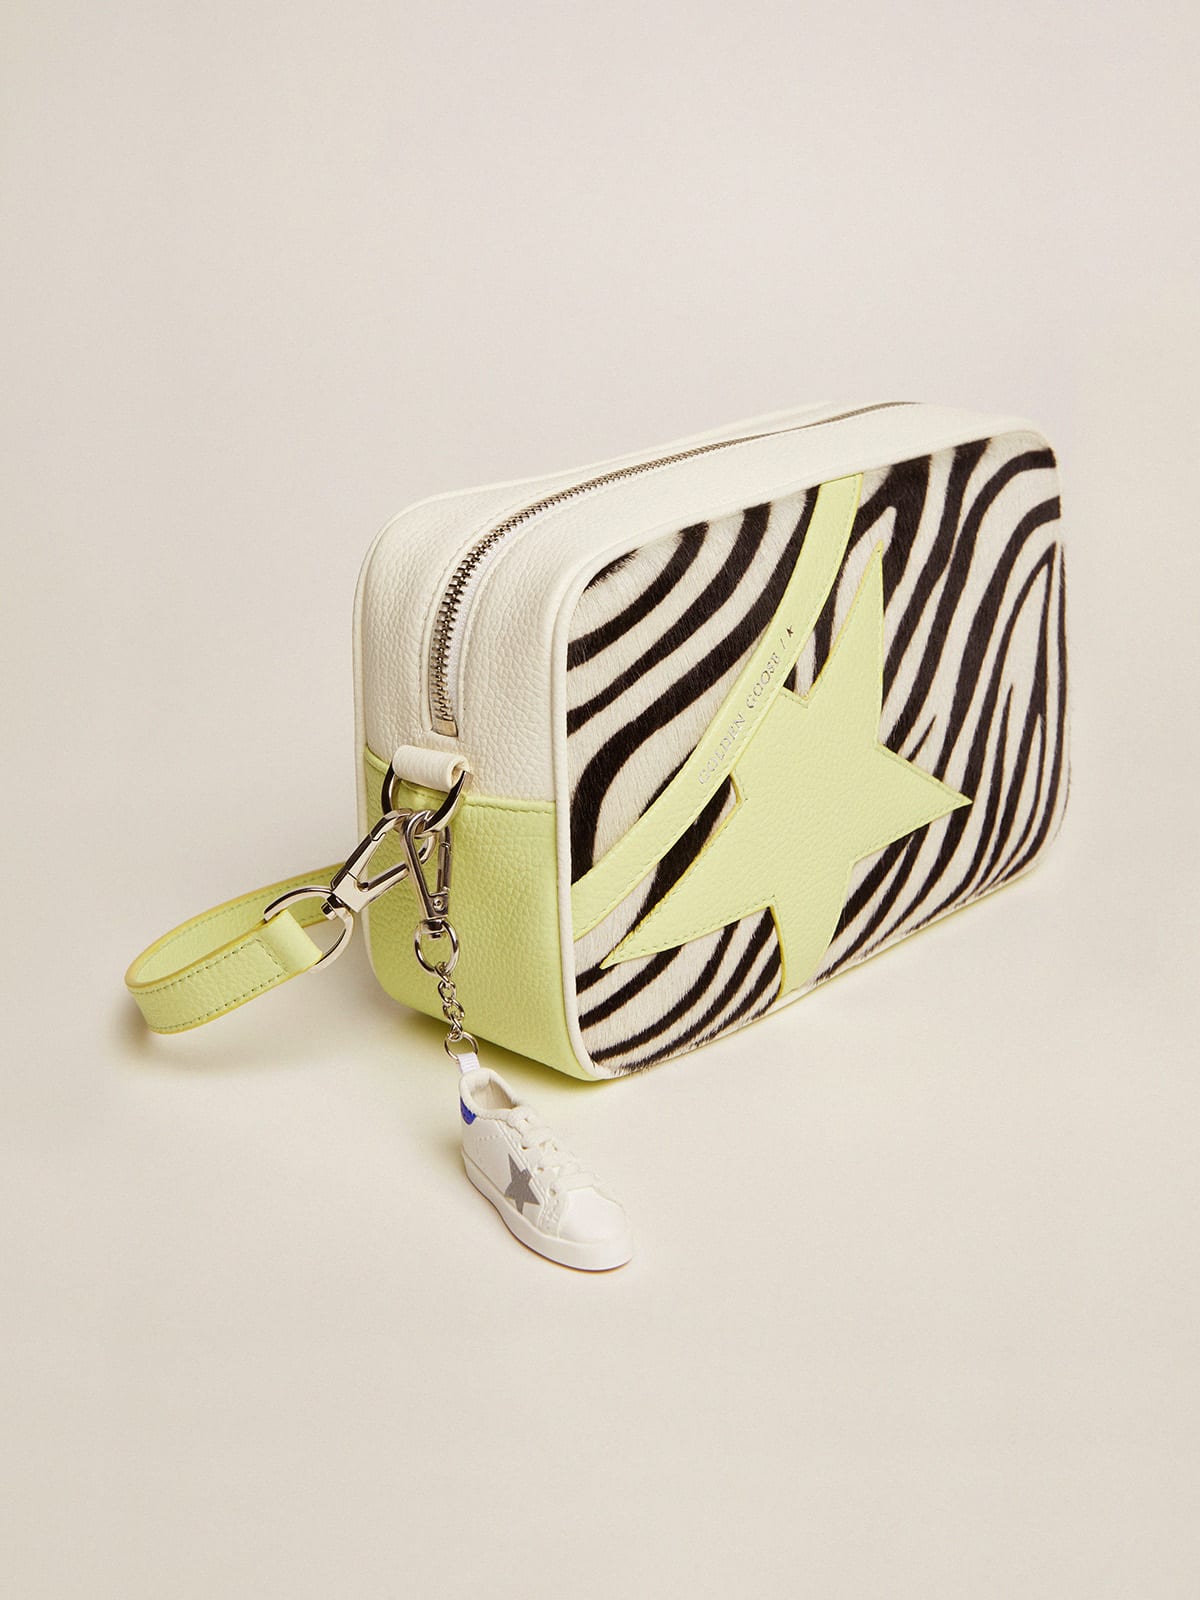 Golden Goose - Star Bag in white and lime hammered leather with zebra-print pony skin insert and lime-colored leather star in 